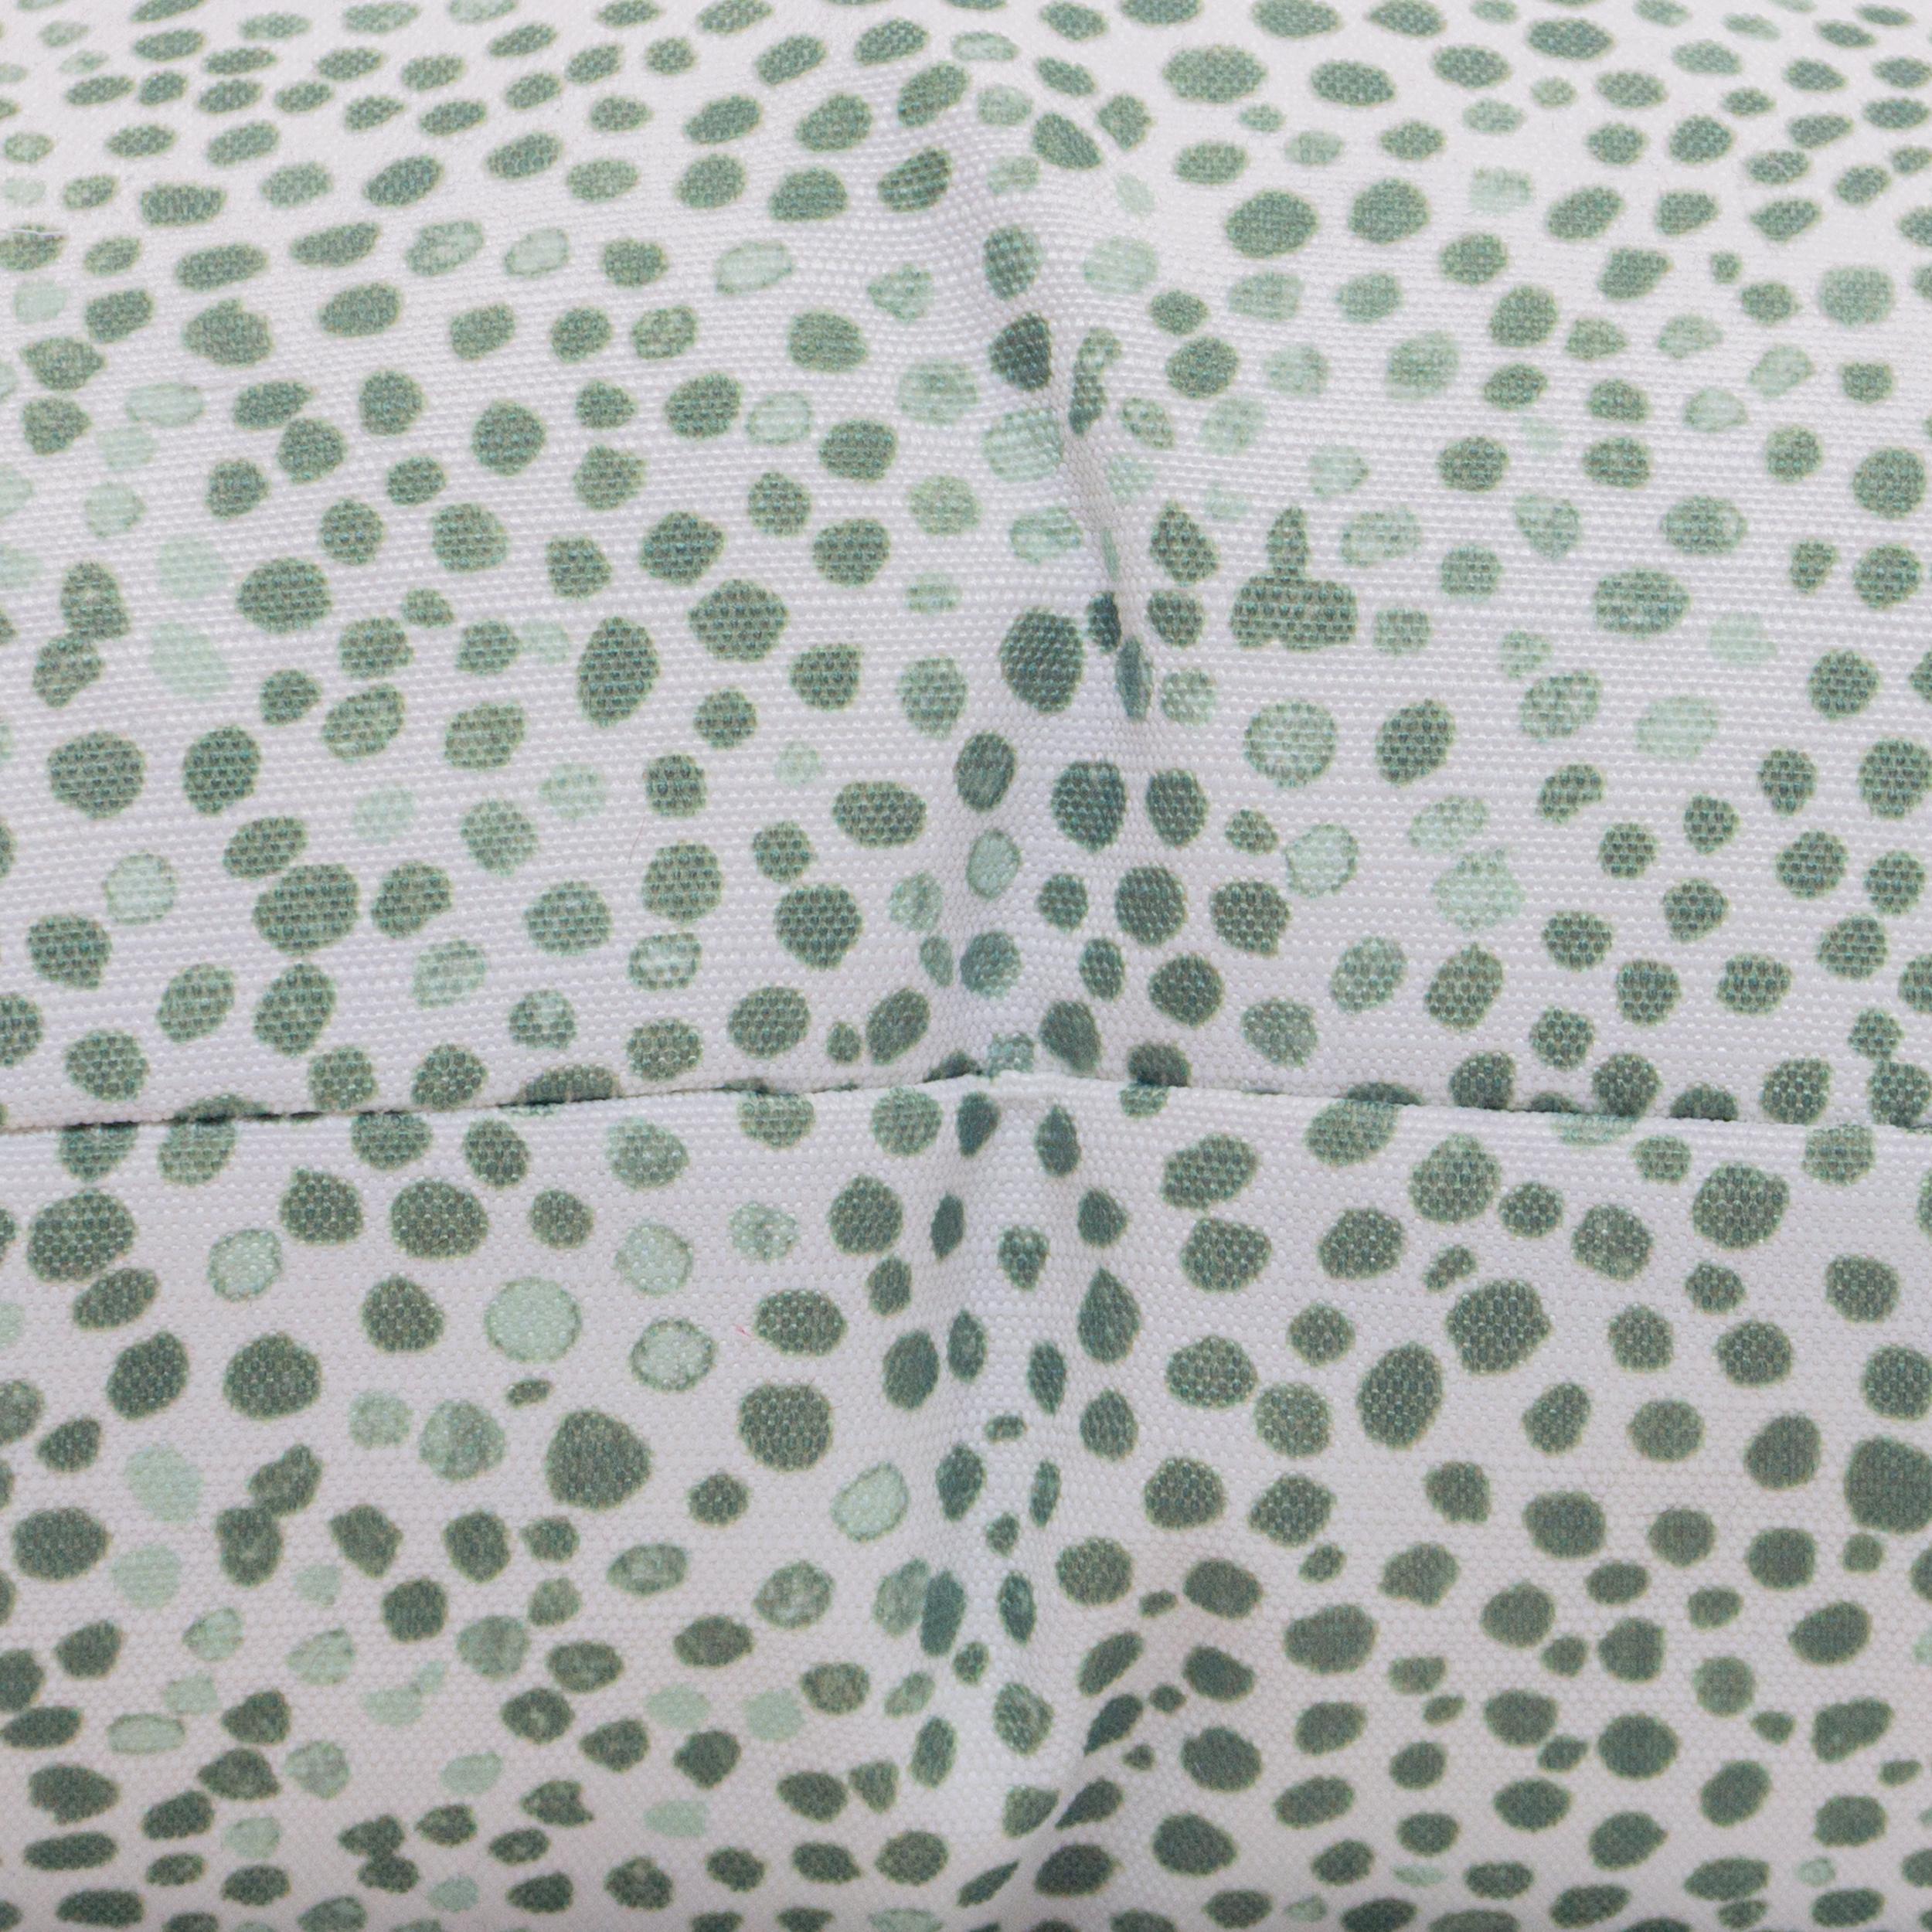 Modern White with Green Dots / Spots Pillows For Sale